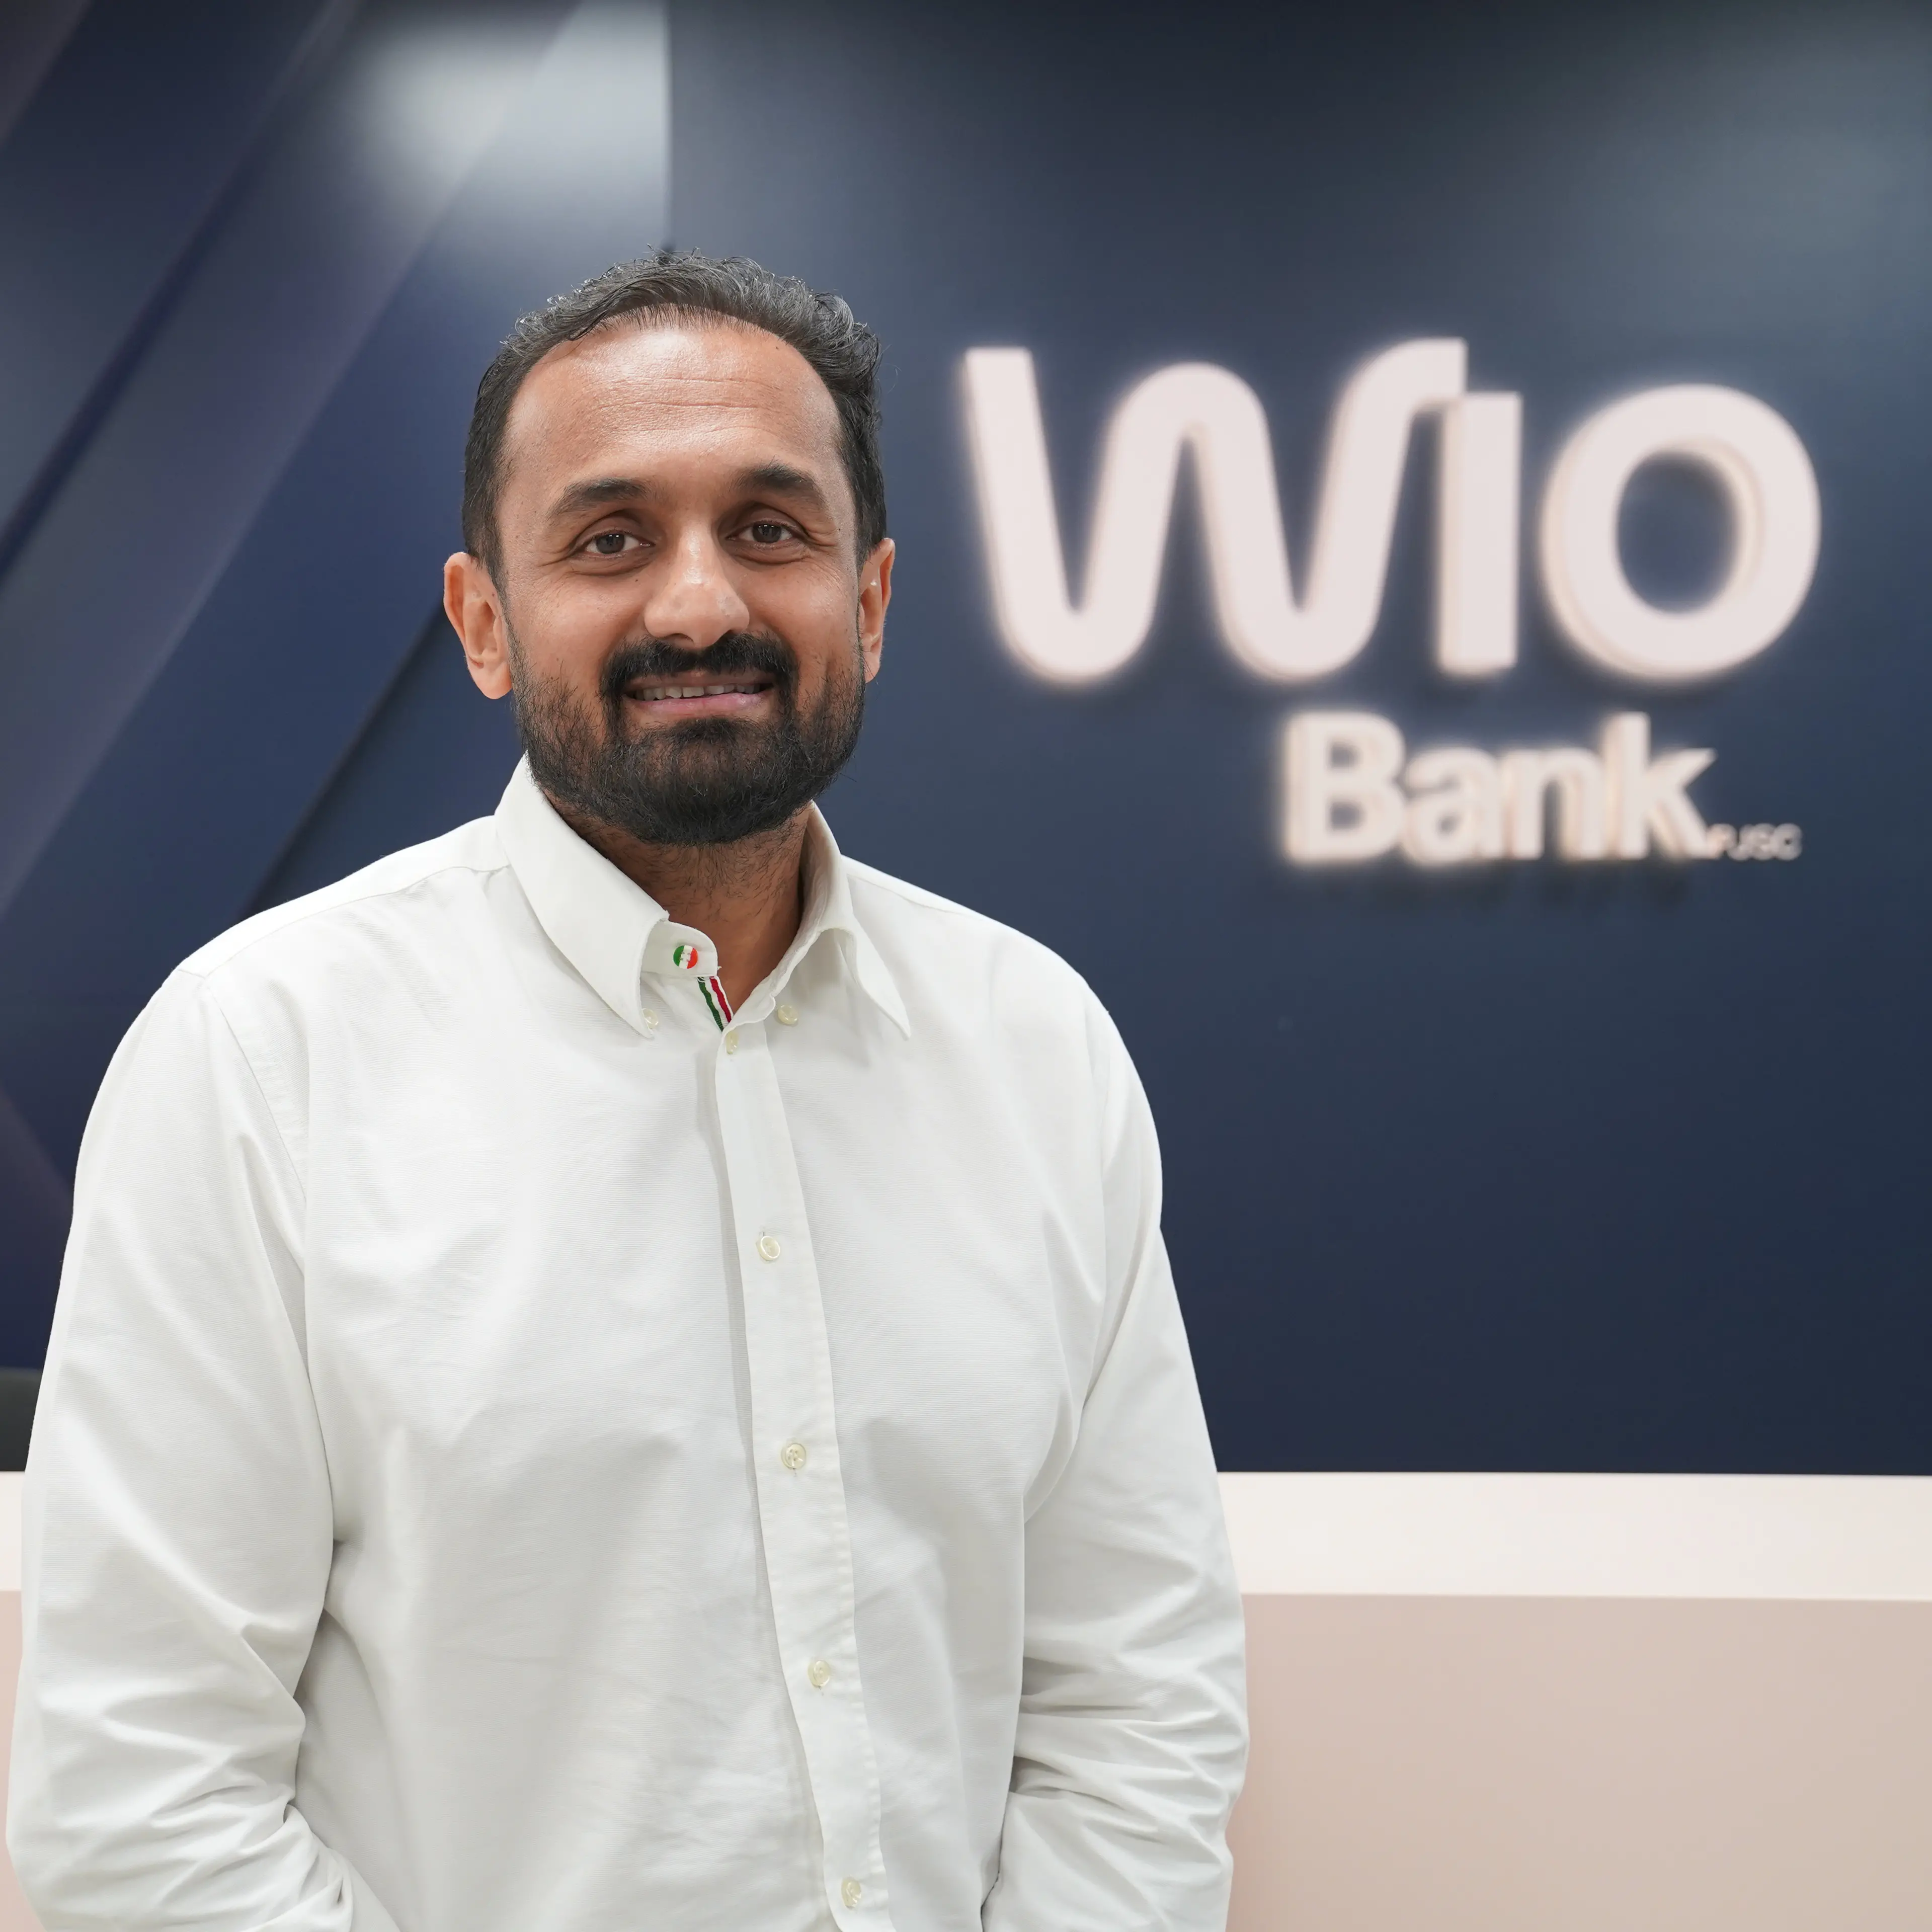 Abu Dhabi's Wio to launch retail banking soon, plans global expansion